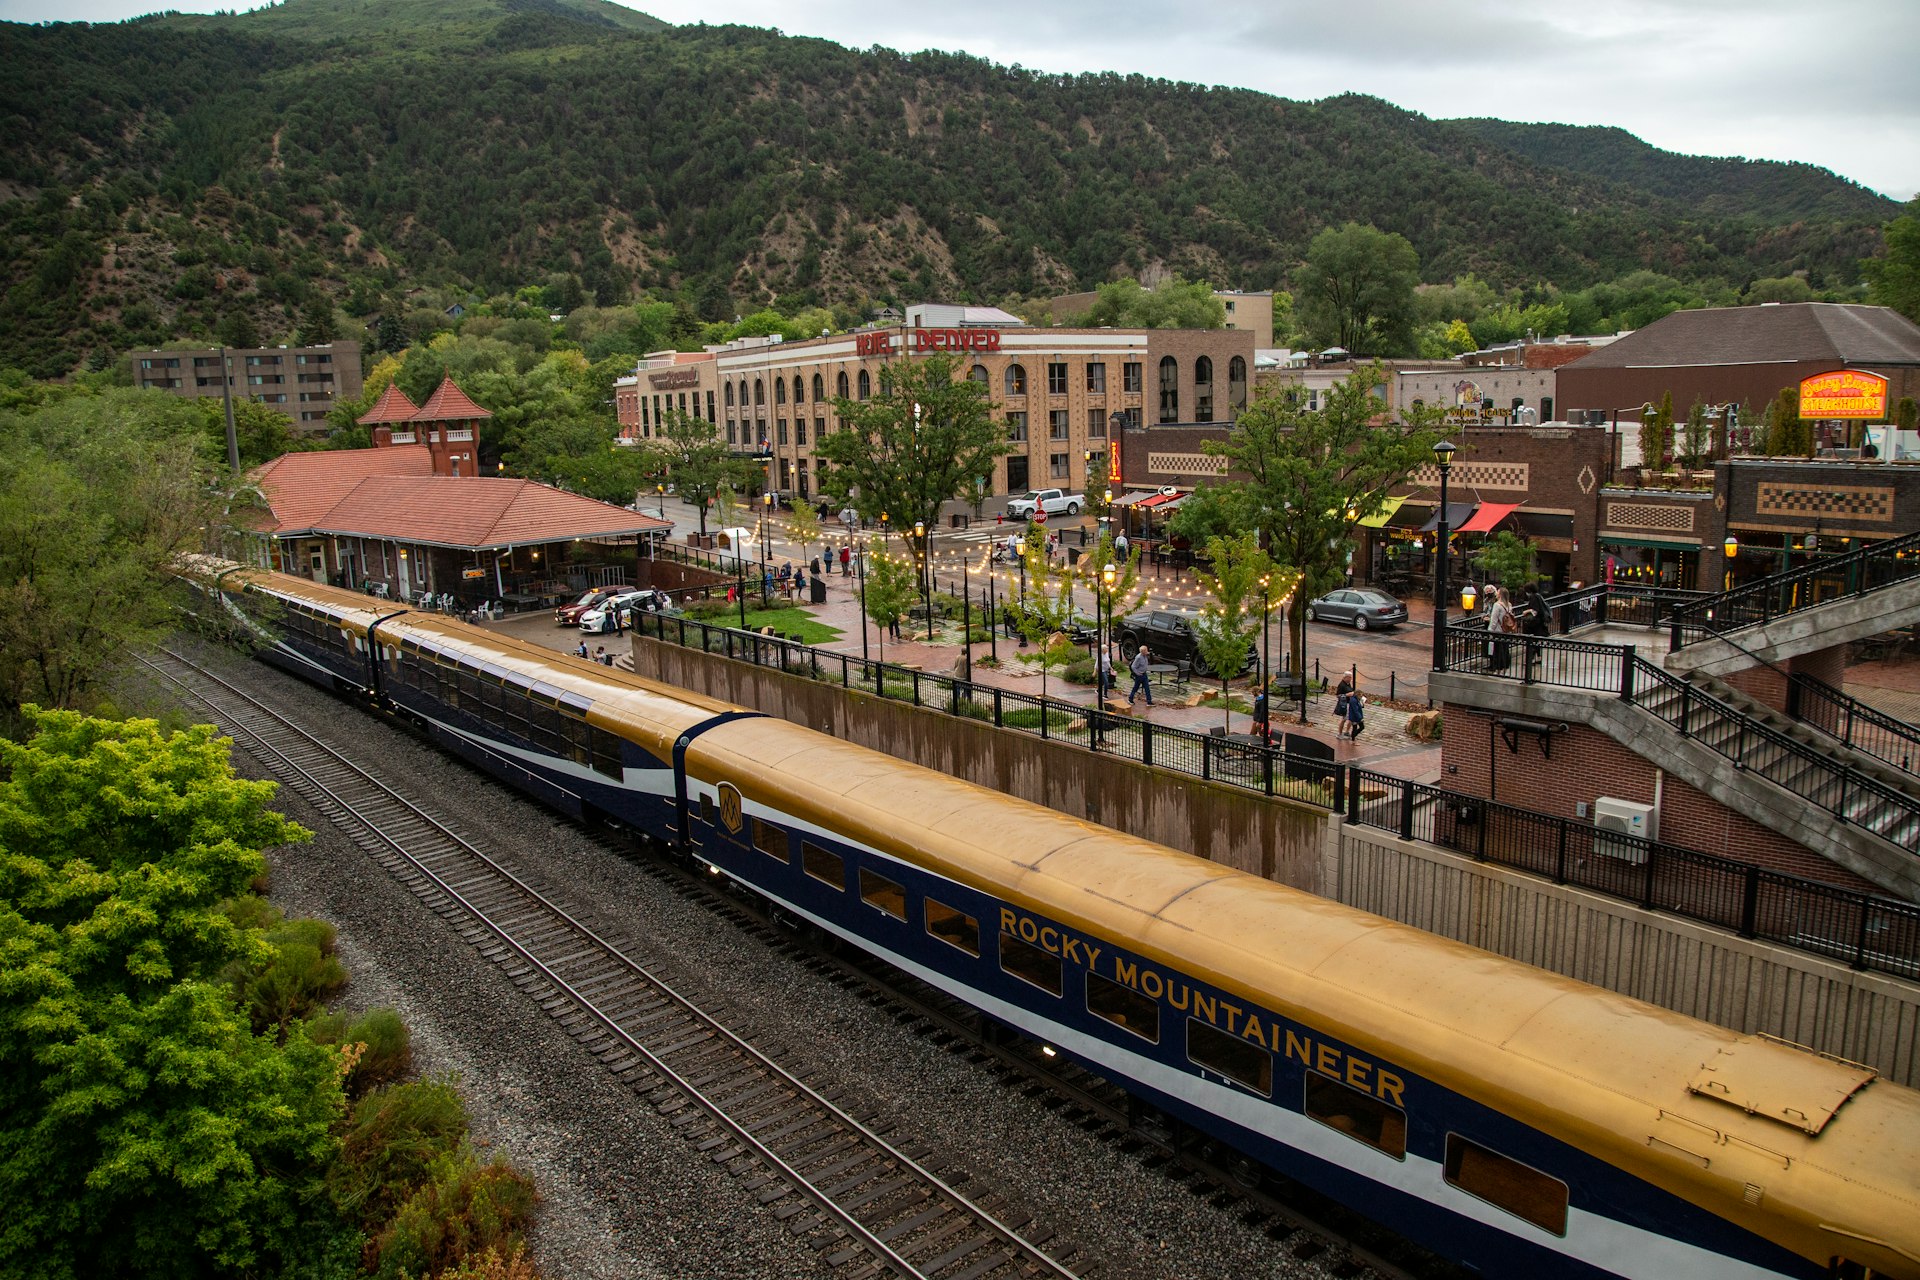 A train stationed in a town surrounded by mountains